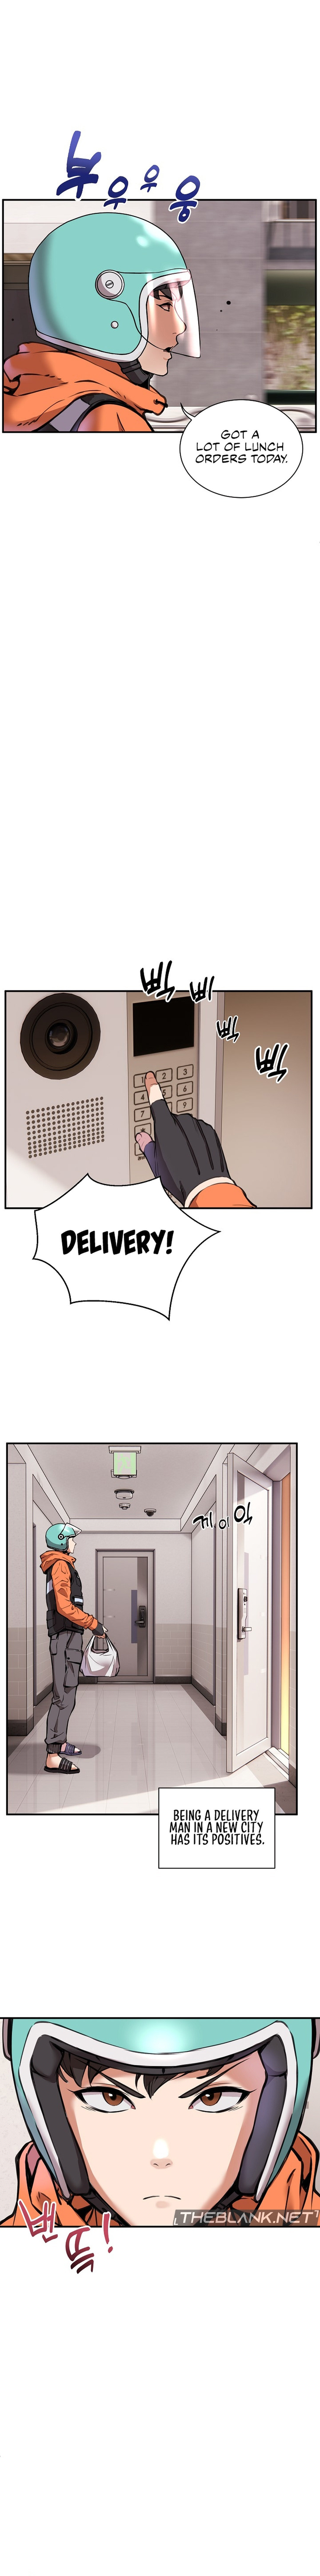 Driver in the New City - Chapter 1 Page 3